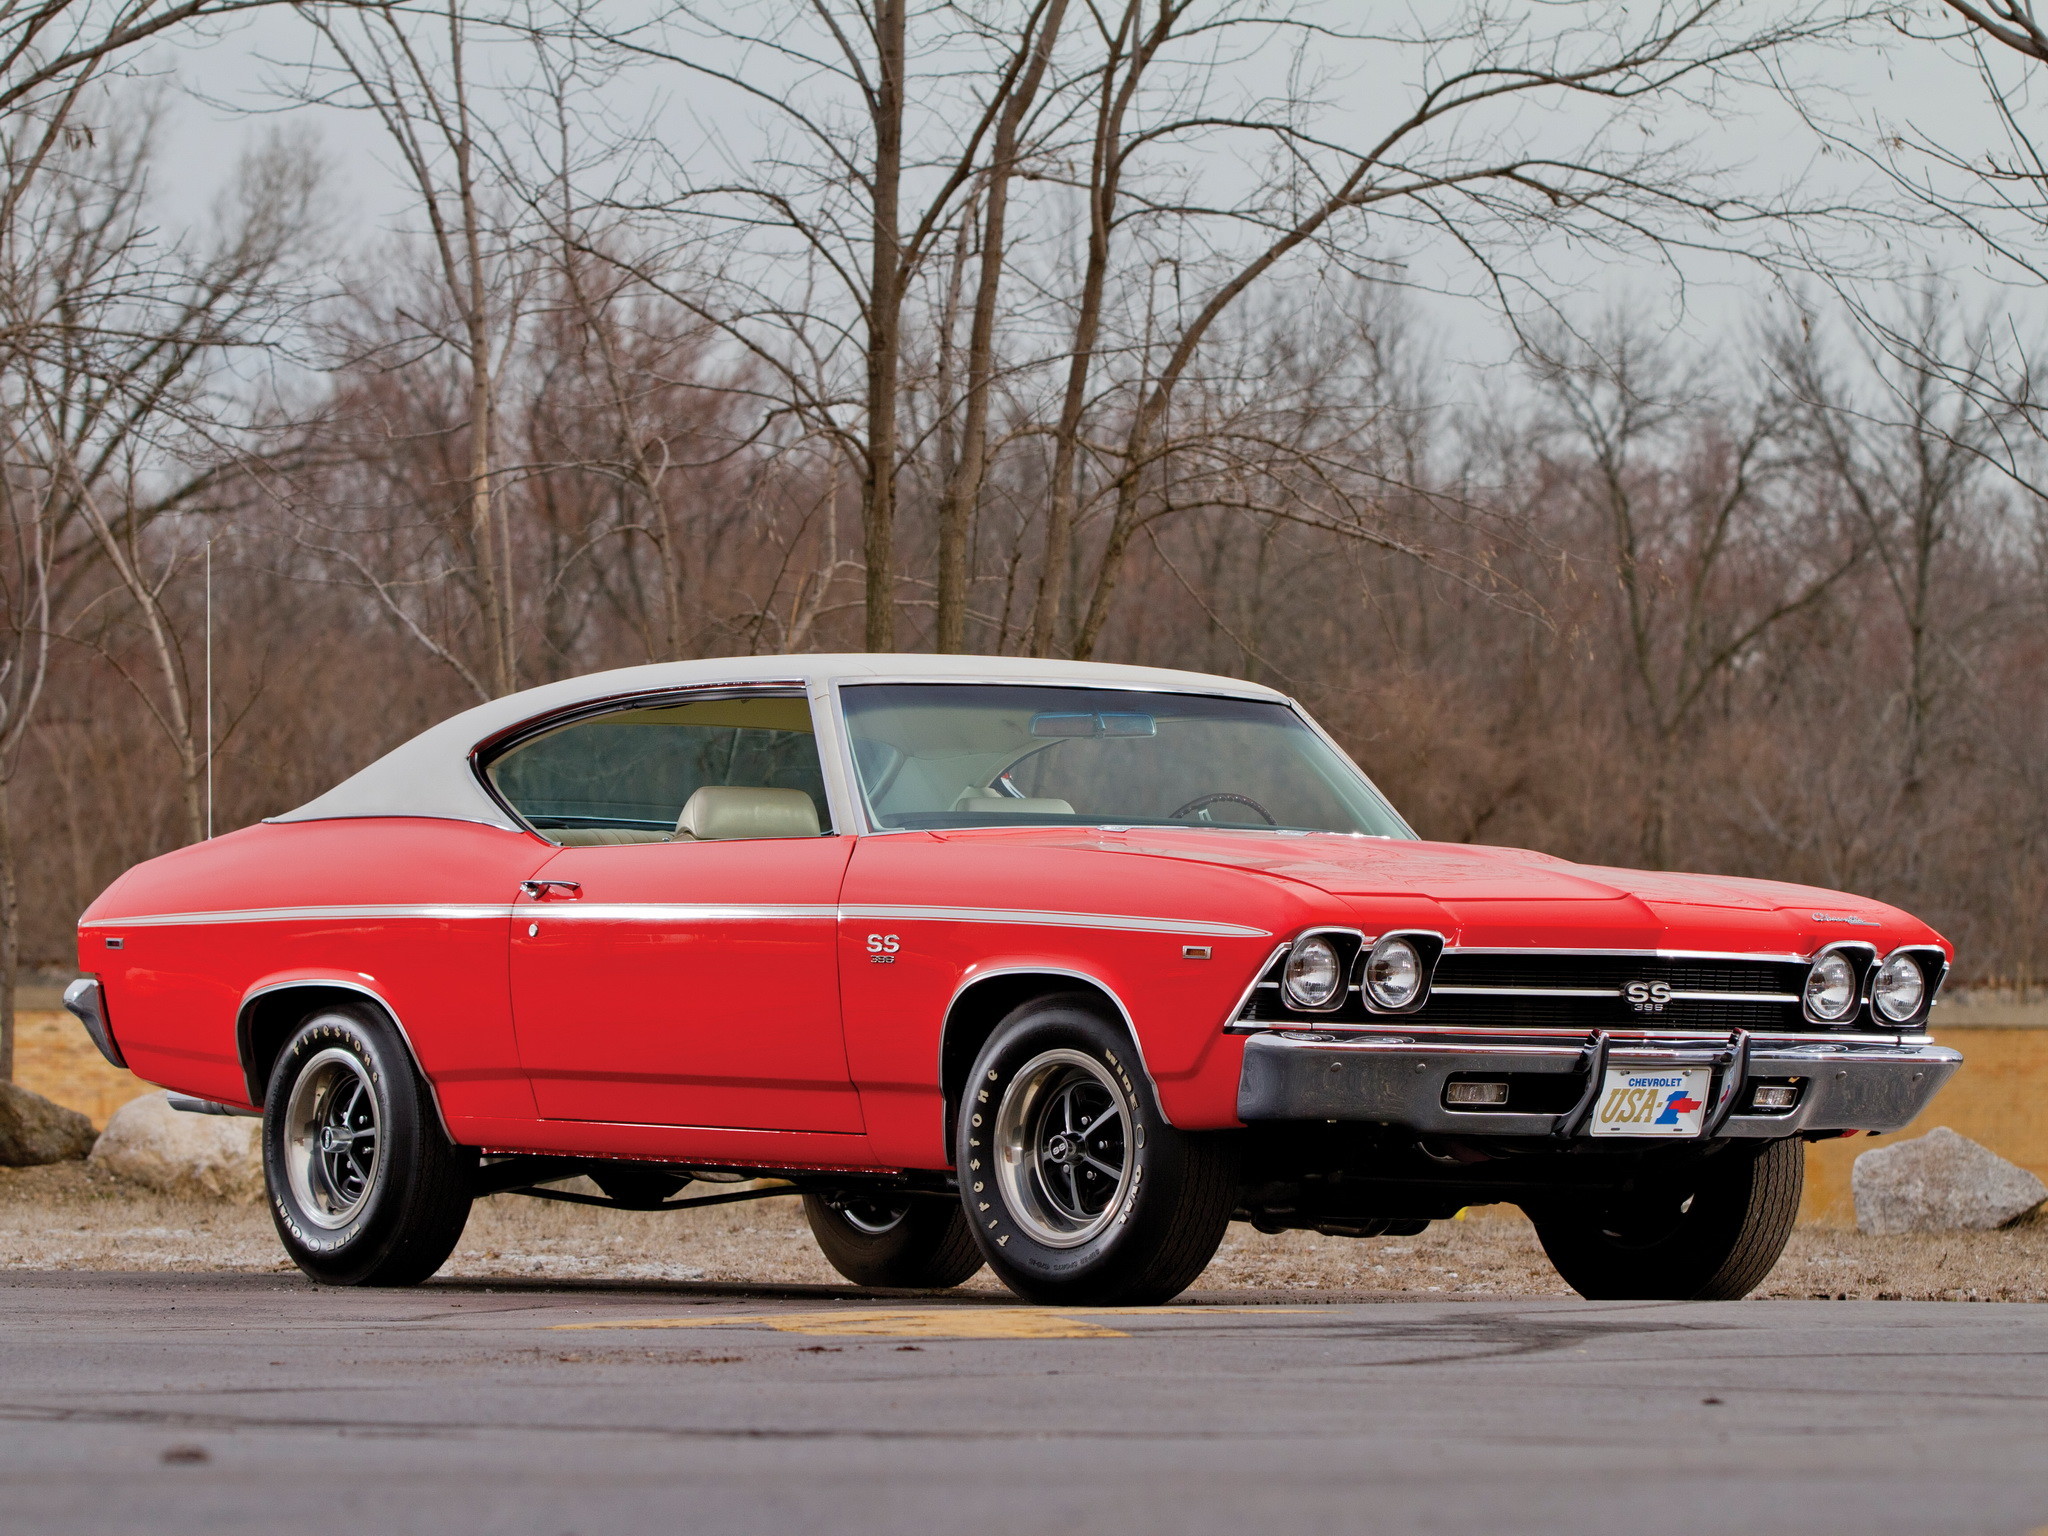 2048x1536 1969 Chevrolet Chevelle S-S 396 L34 Hardtop Coupe muscle classic g wallpaper  |  | 134839 | WallpaperUP